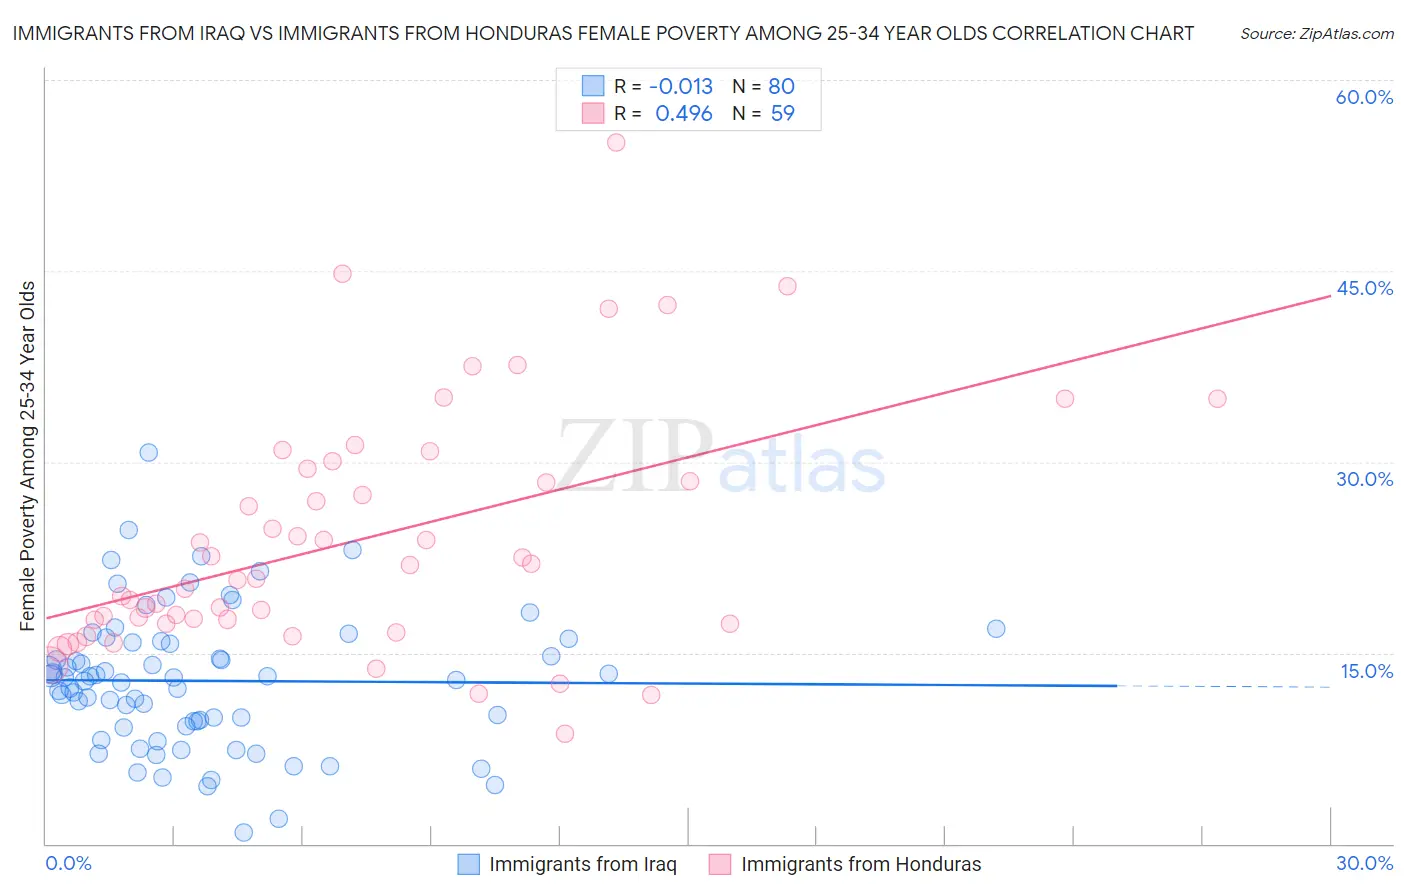 Immigrants from Iraq vs Immigrants from Honduras Female Poverty Among 25-34 Year Olds